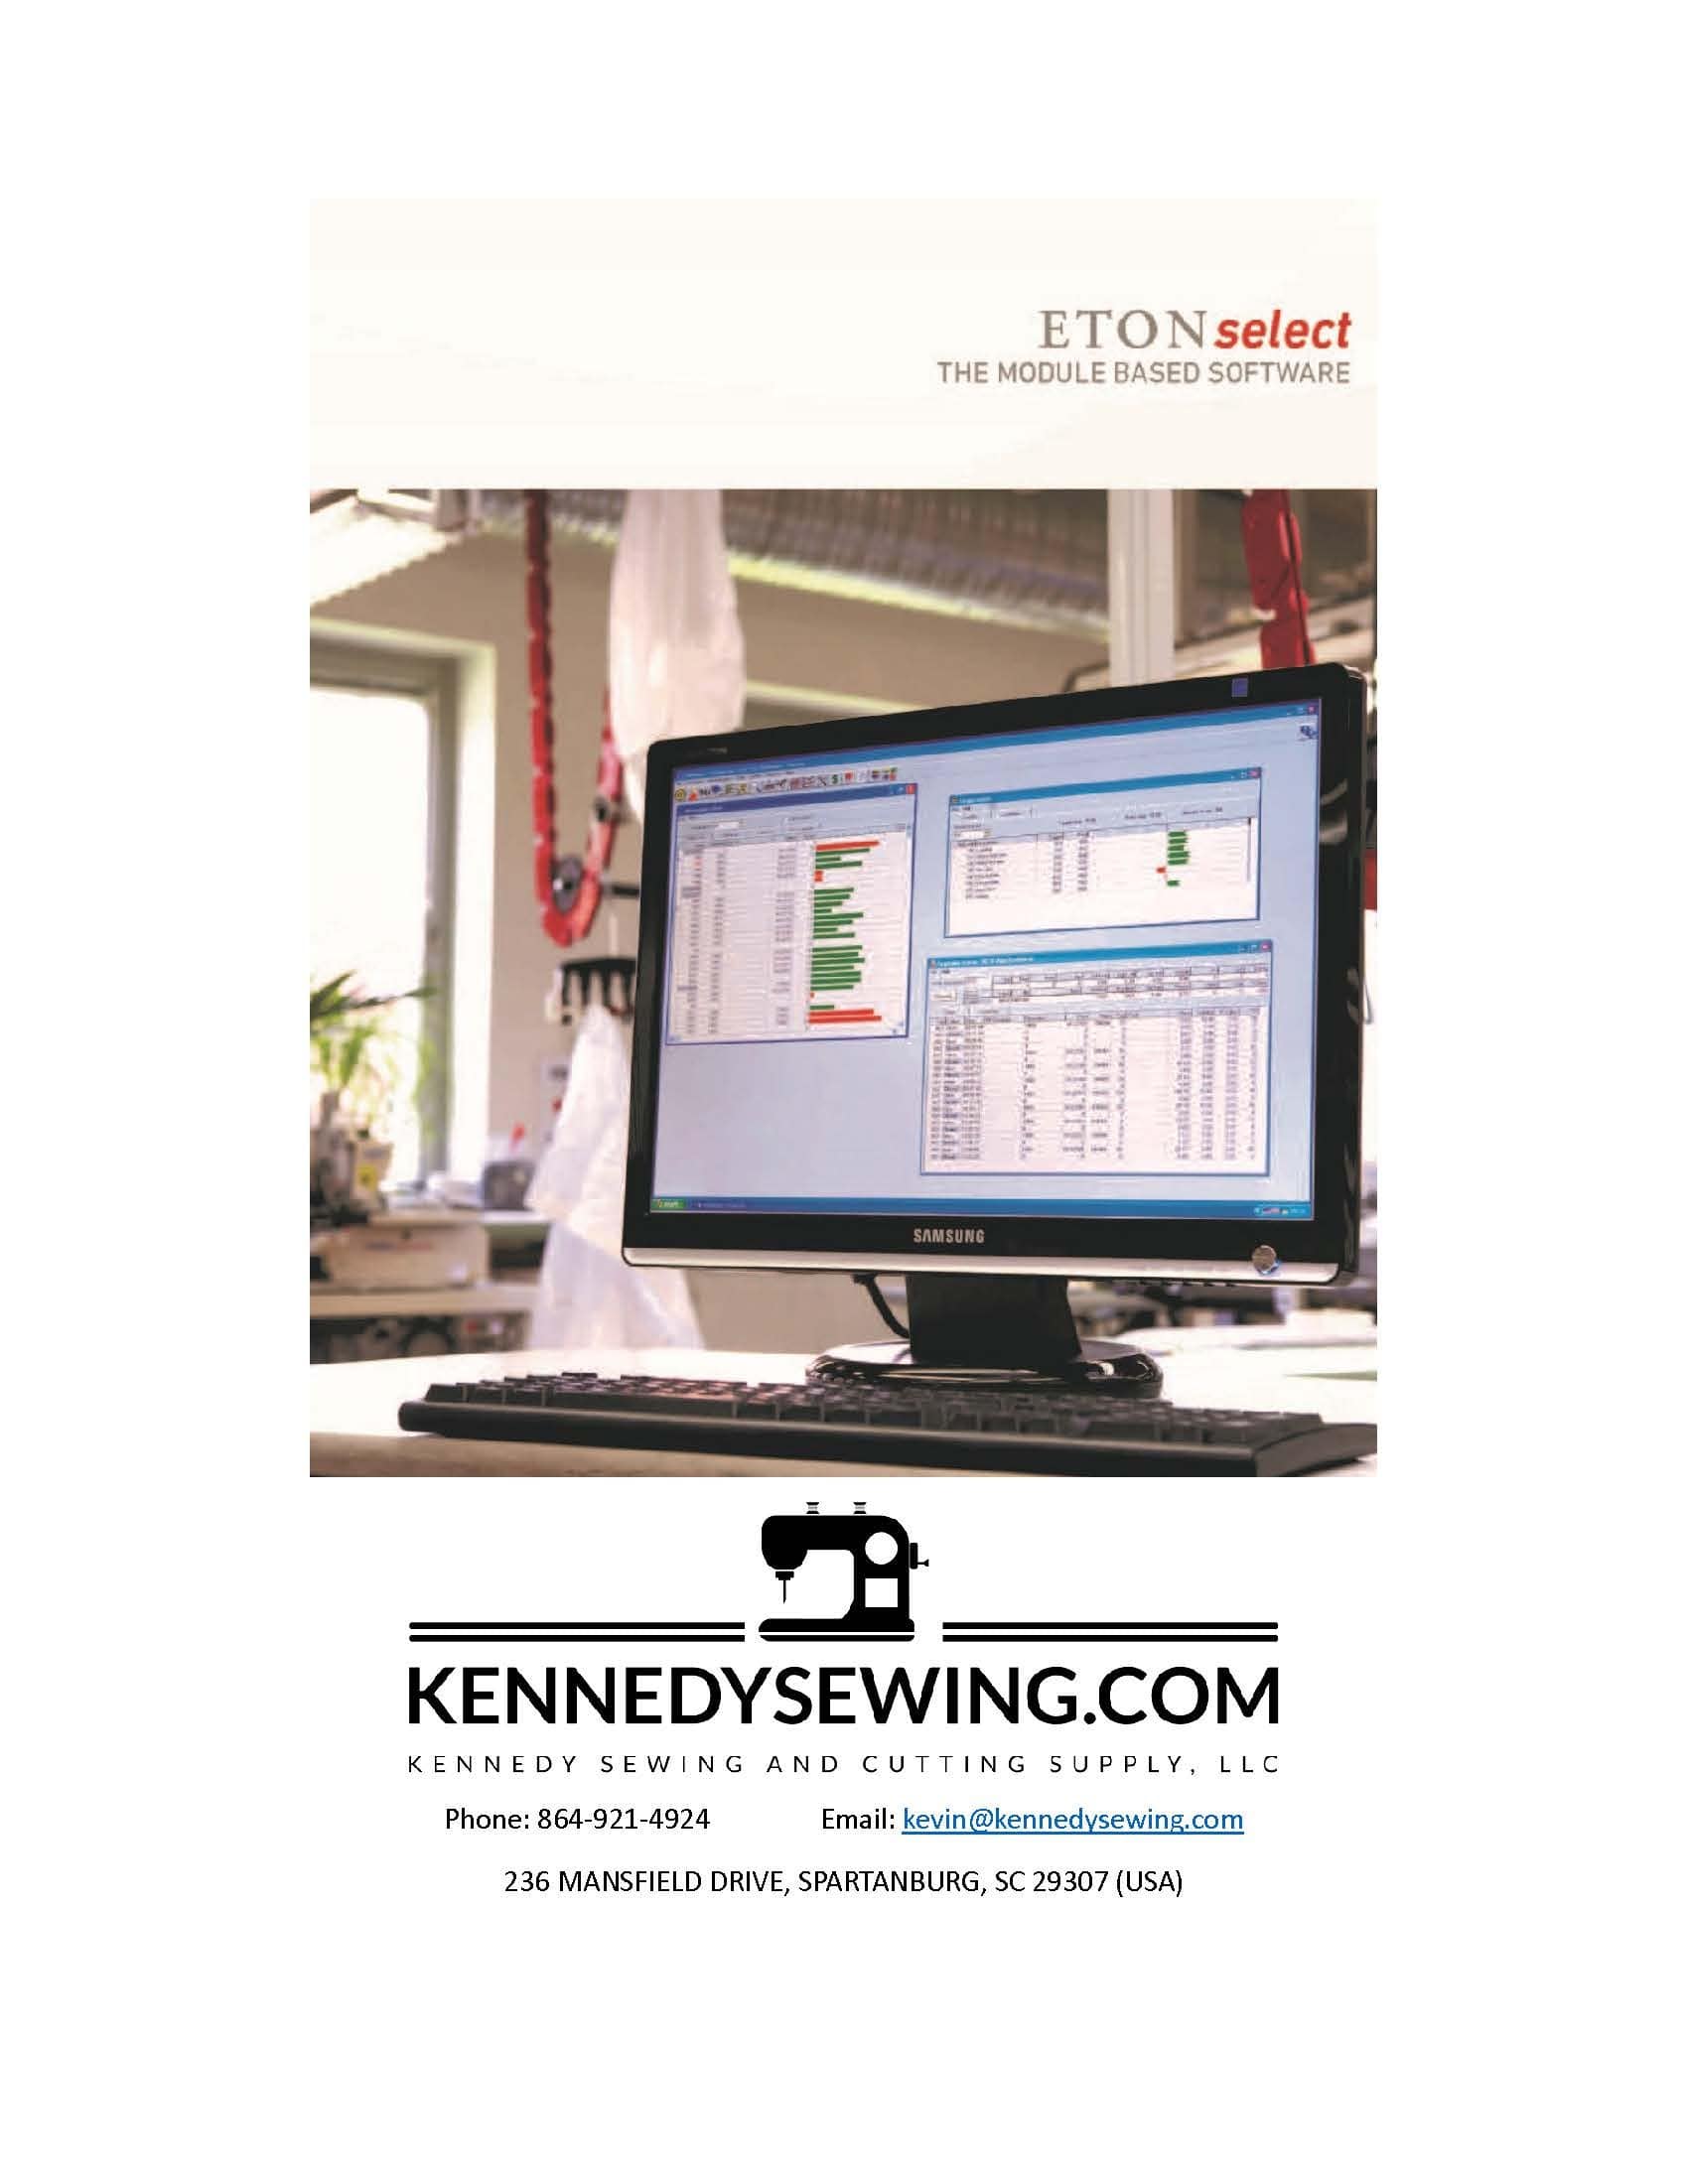 ETON SYSTEMS ETONselect Software. ETONselect is equipped with a very powerful
Graphical User Interface (GUI)